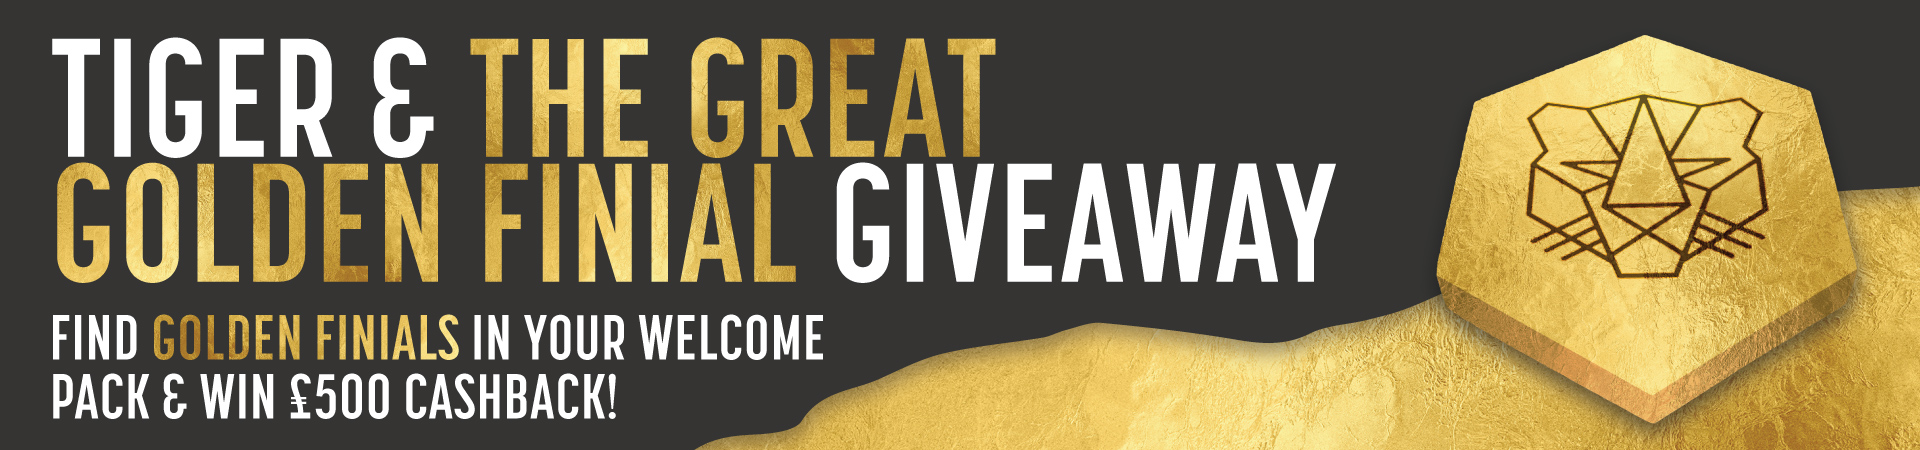 The Great Golden Finial Giveaway